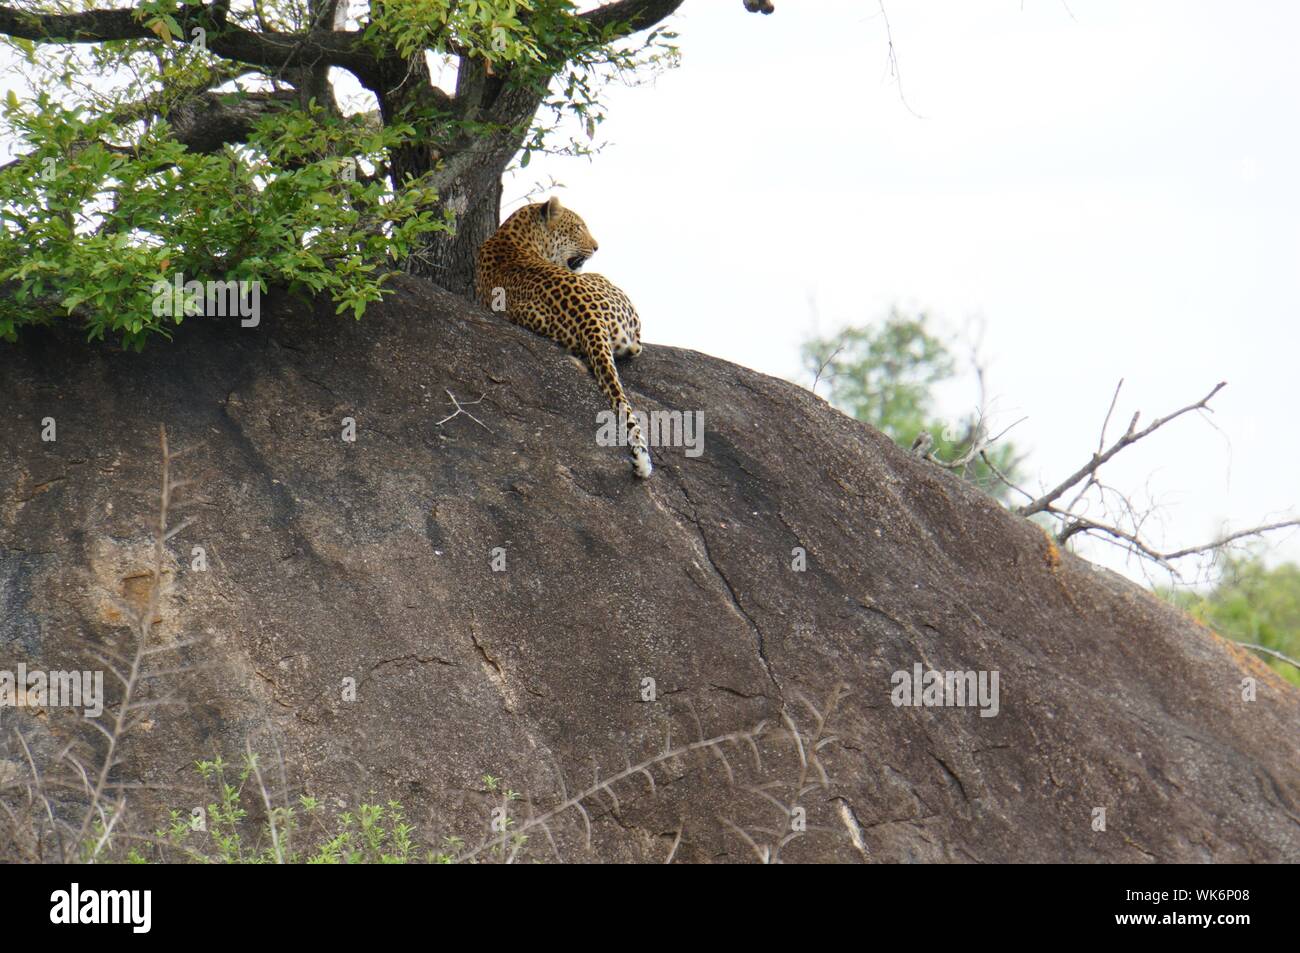 Low Angle View Of Cheetah Sitting On Rock Against Sky Stock Photo